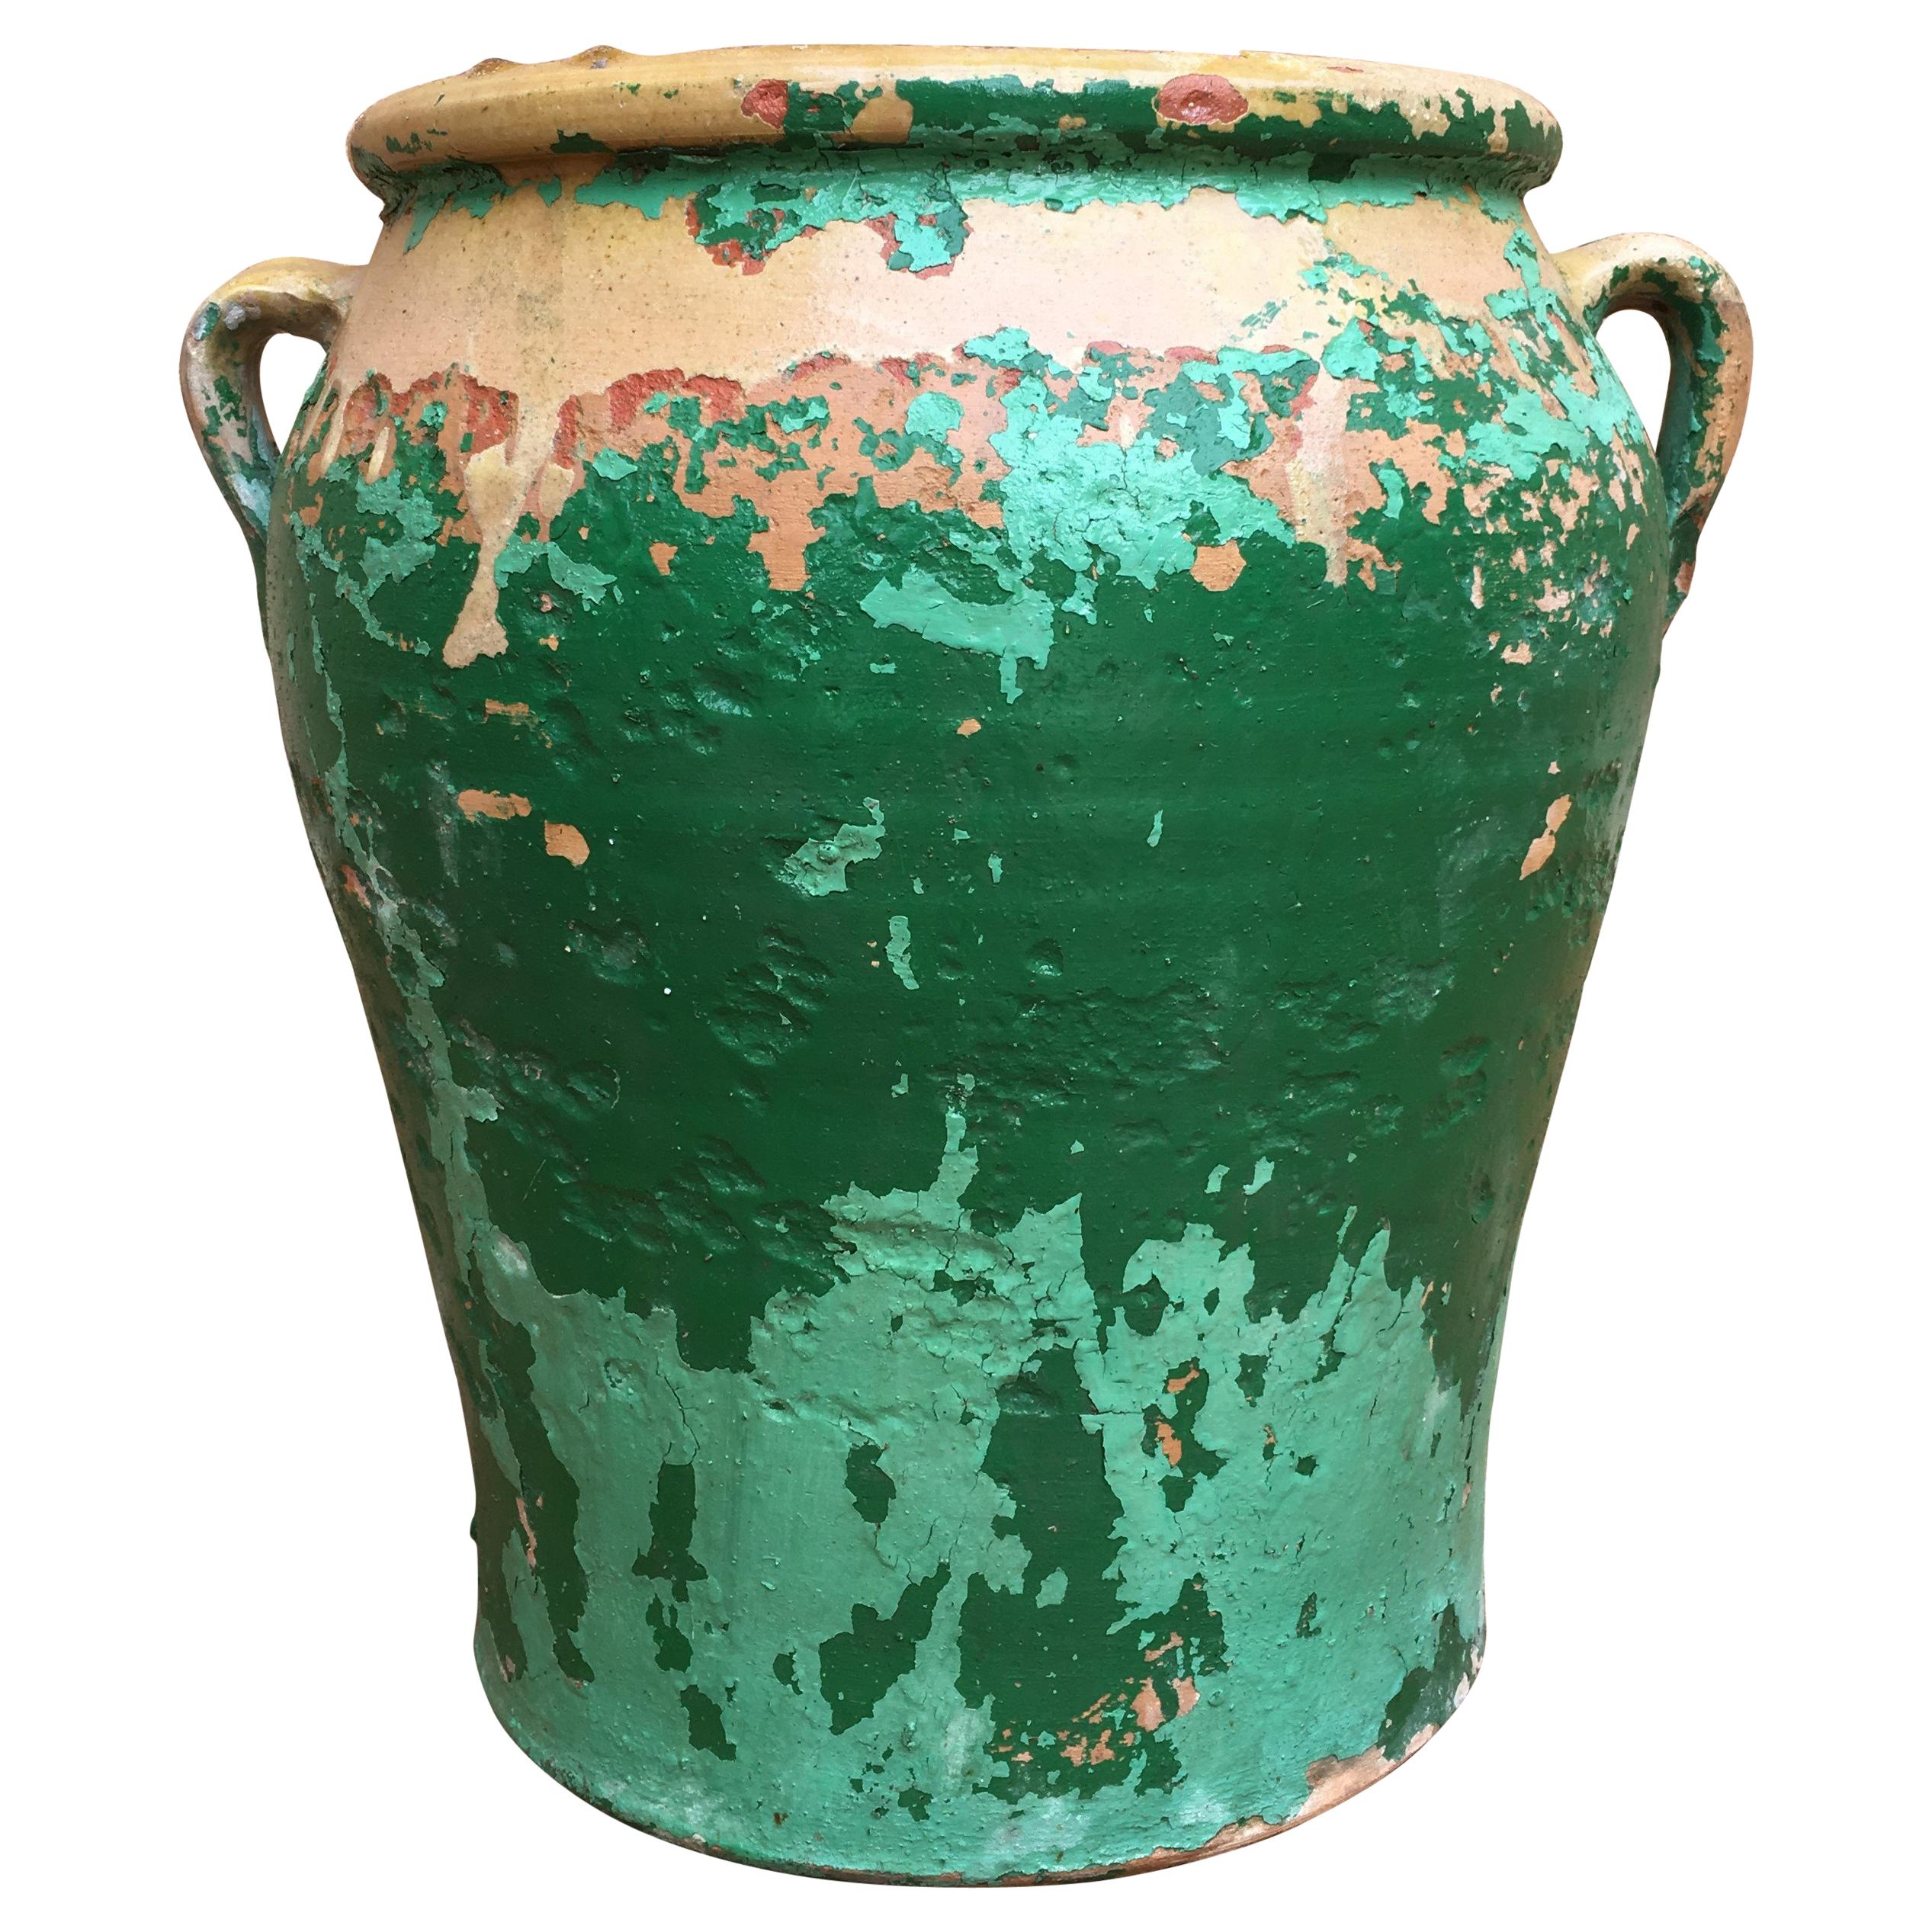 French 19th Century Green-Glazed Castelnaudary Pot or Planter with Handles